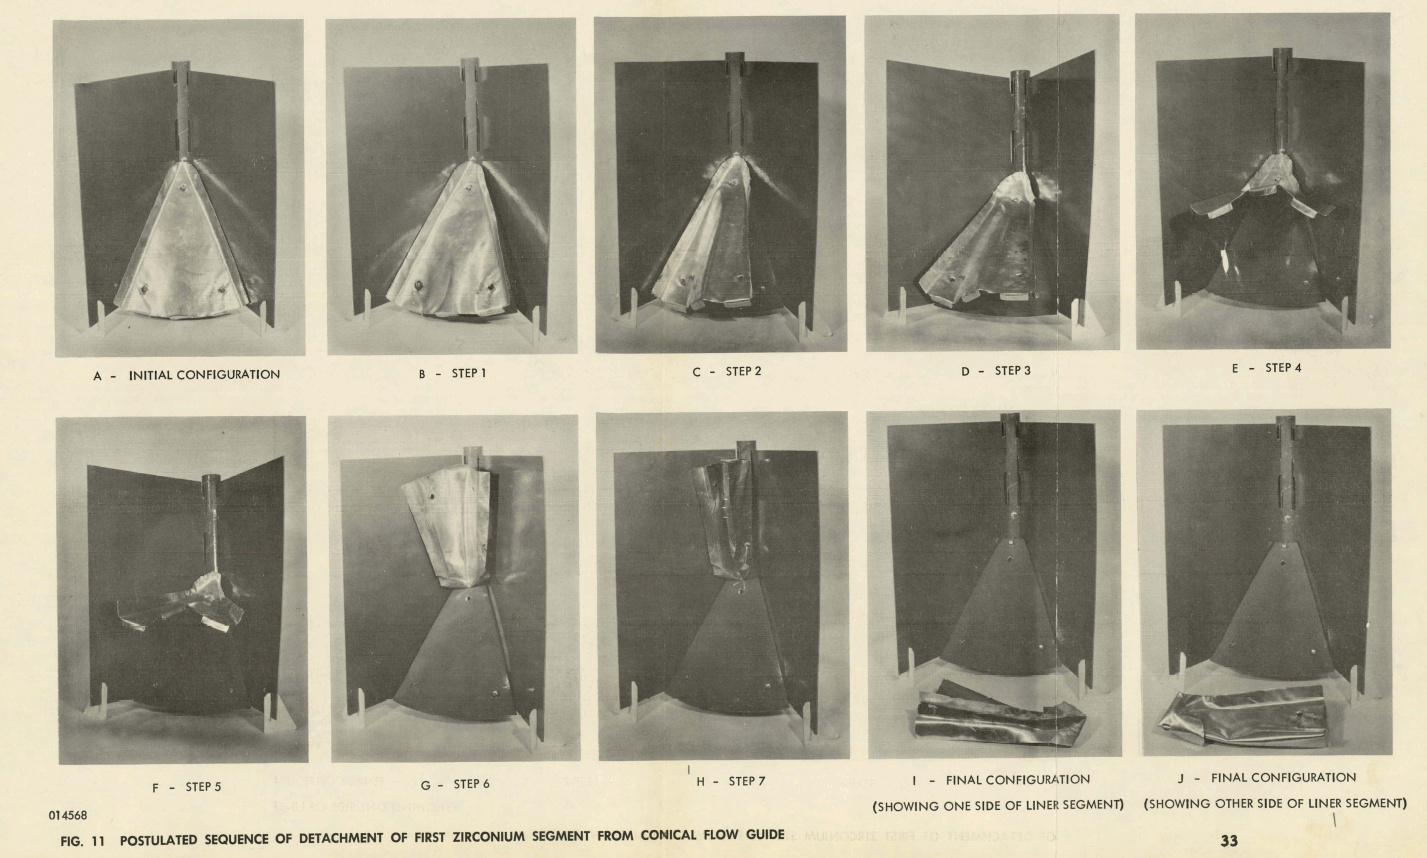 Sequence of pictures showing how the Fermi 1 plate may have broken off to cause the melt down.